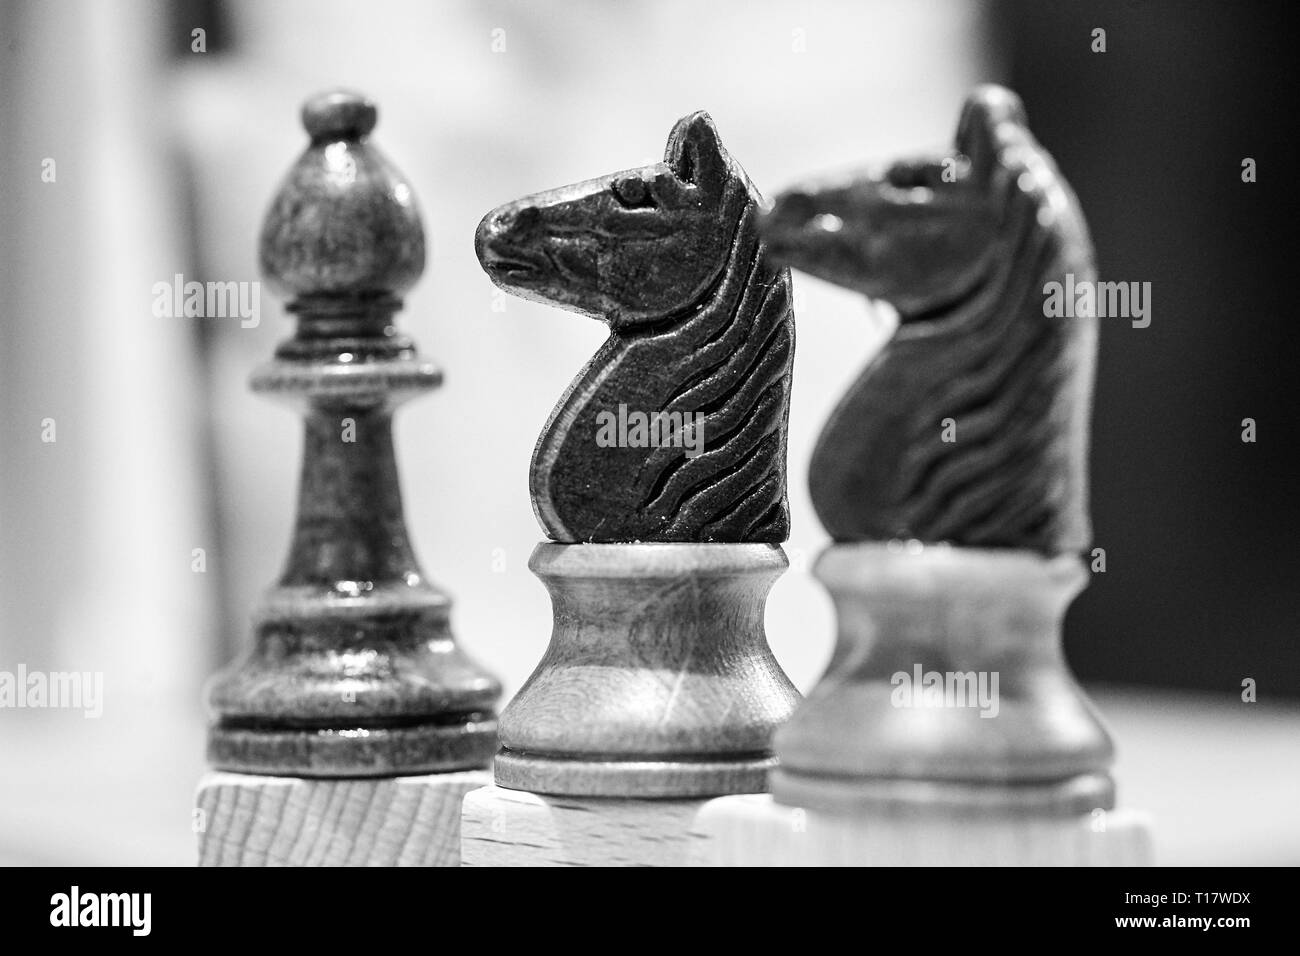 two horse and a pawn chess piece Stock Photo